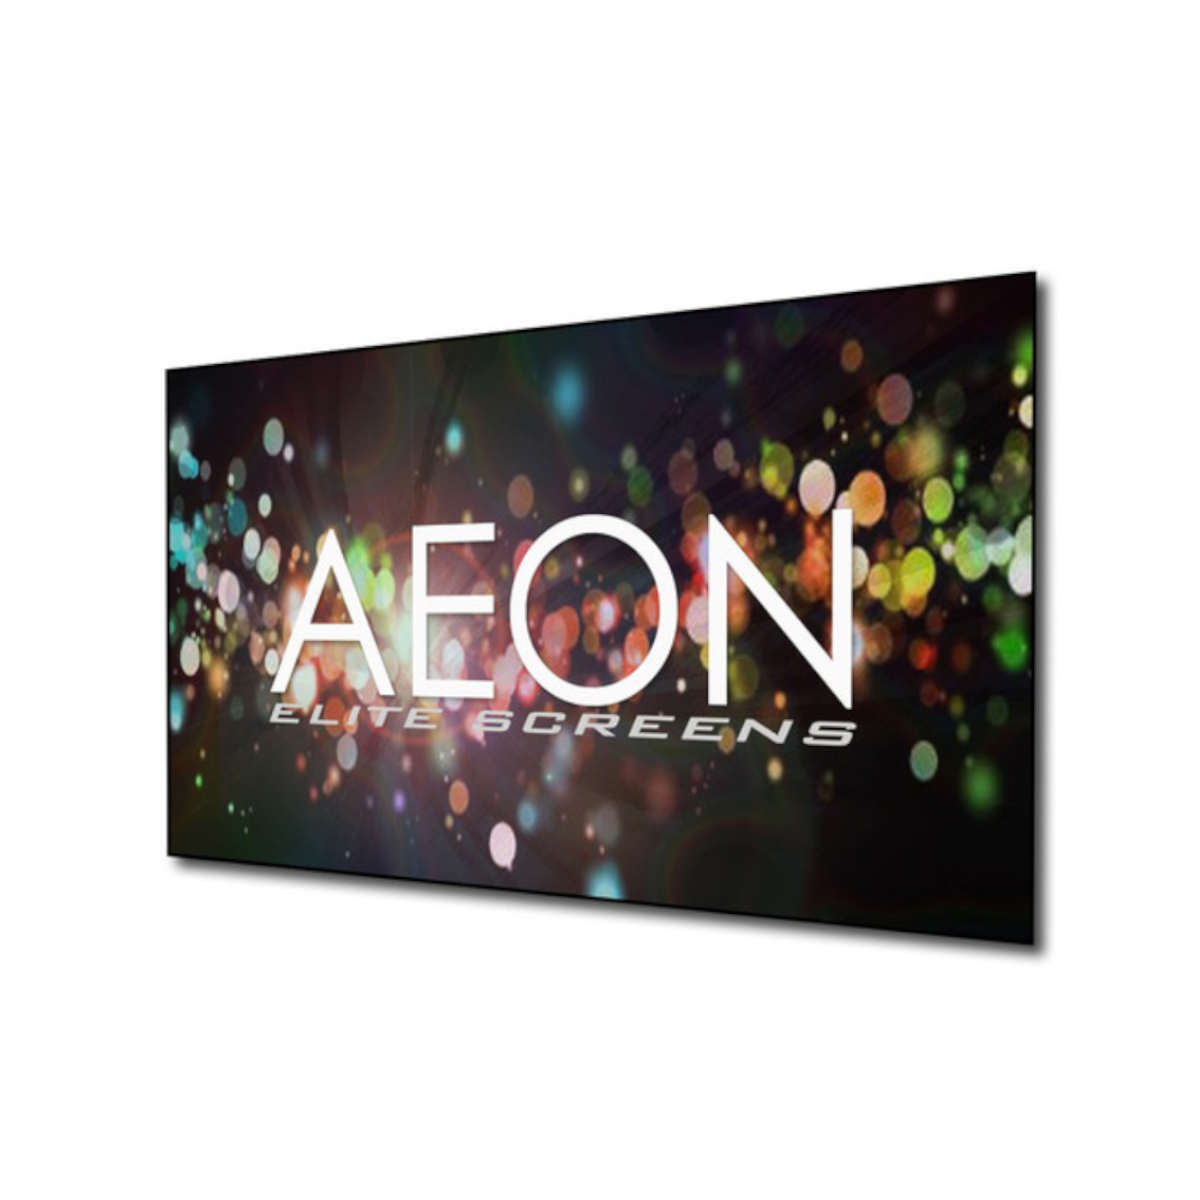 Elite Aeon CineGrey 3D Fixed Frame Projection Screen 120” 16:9 (AR120DHD3) - Ooberpad india